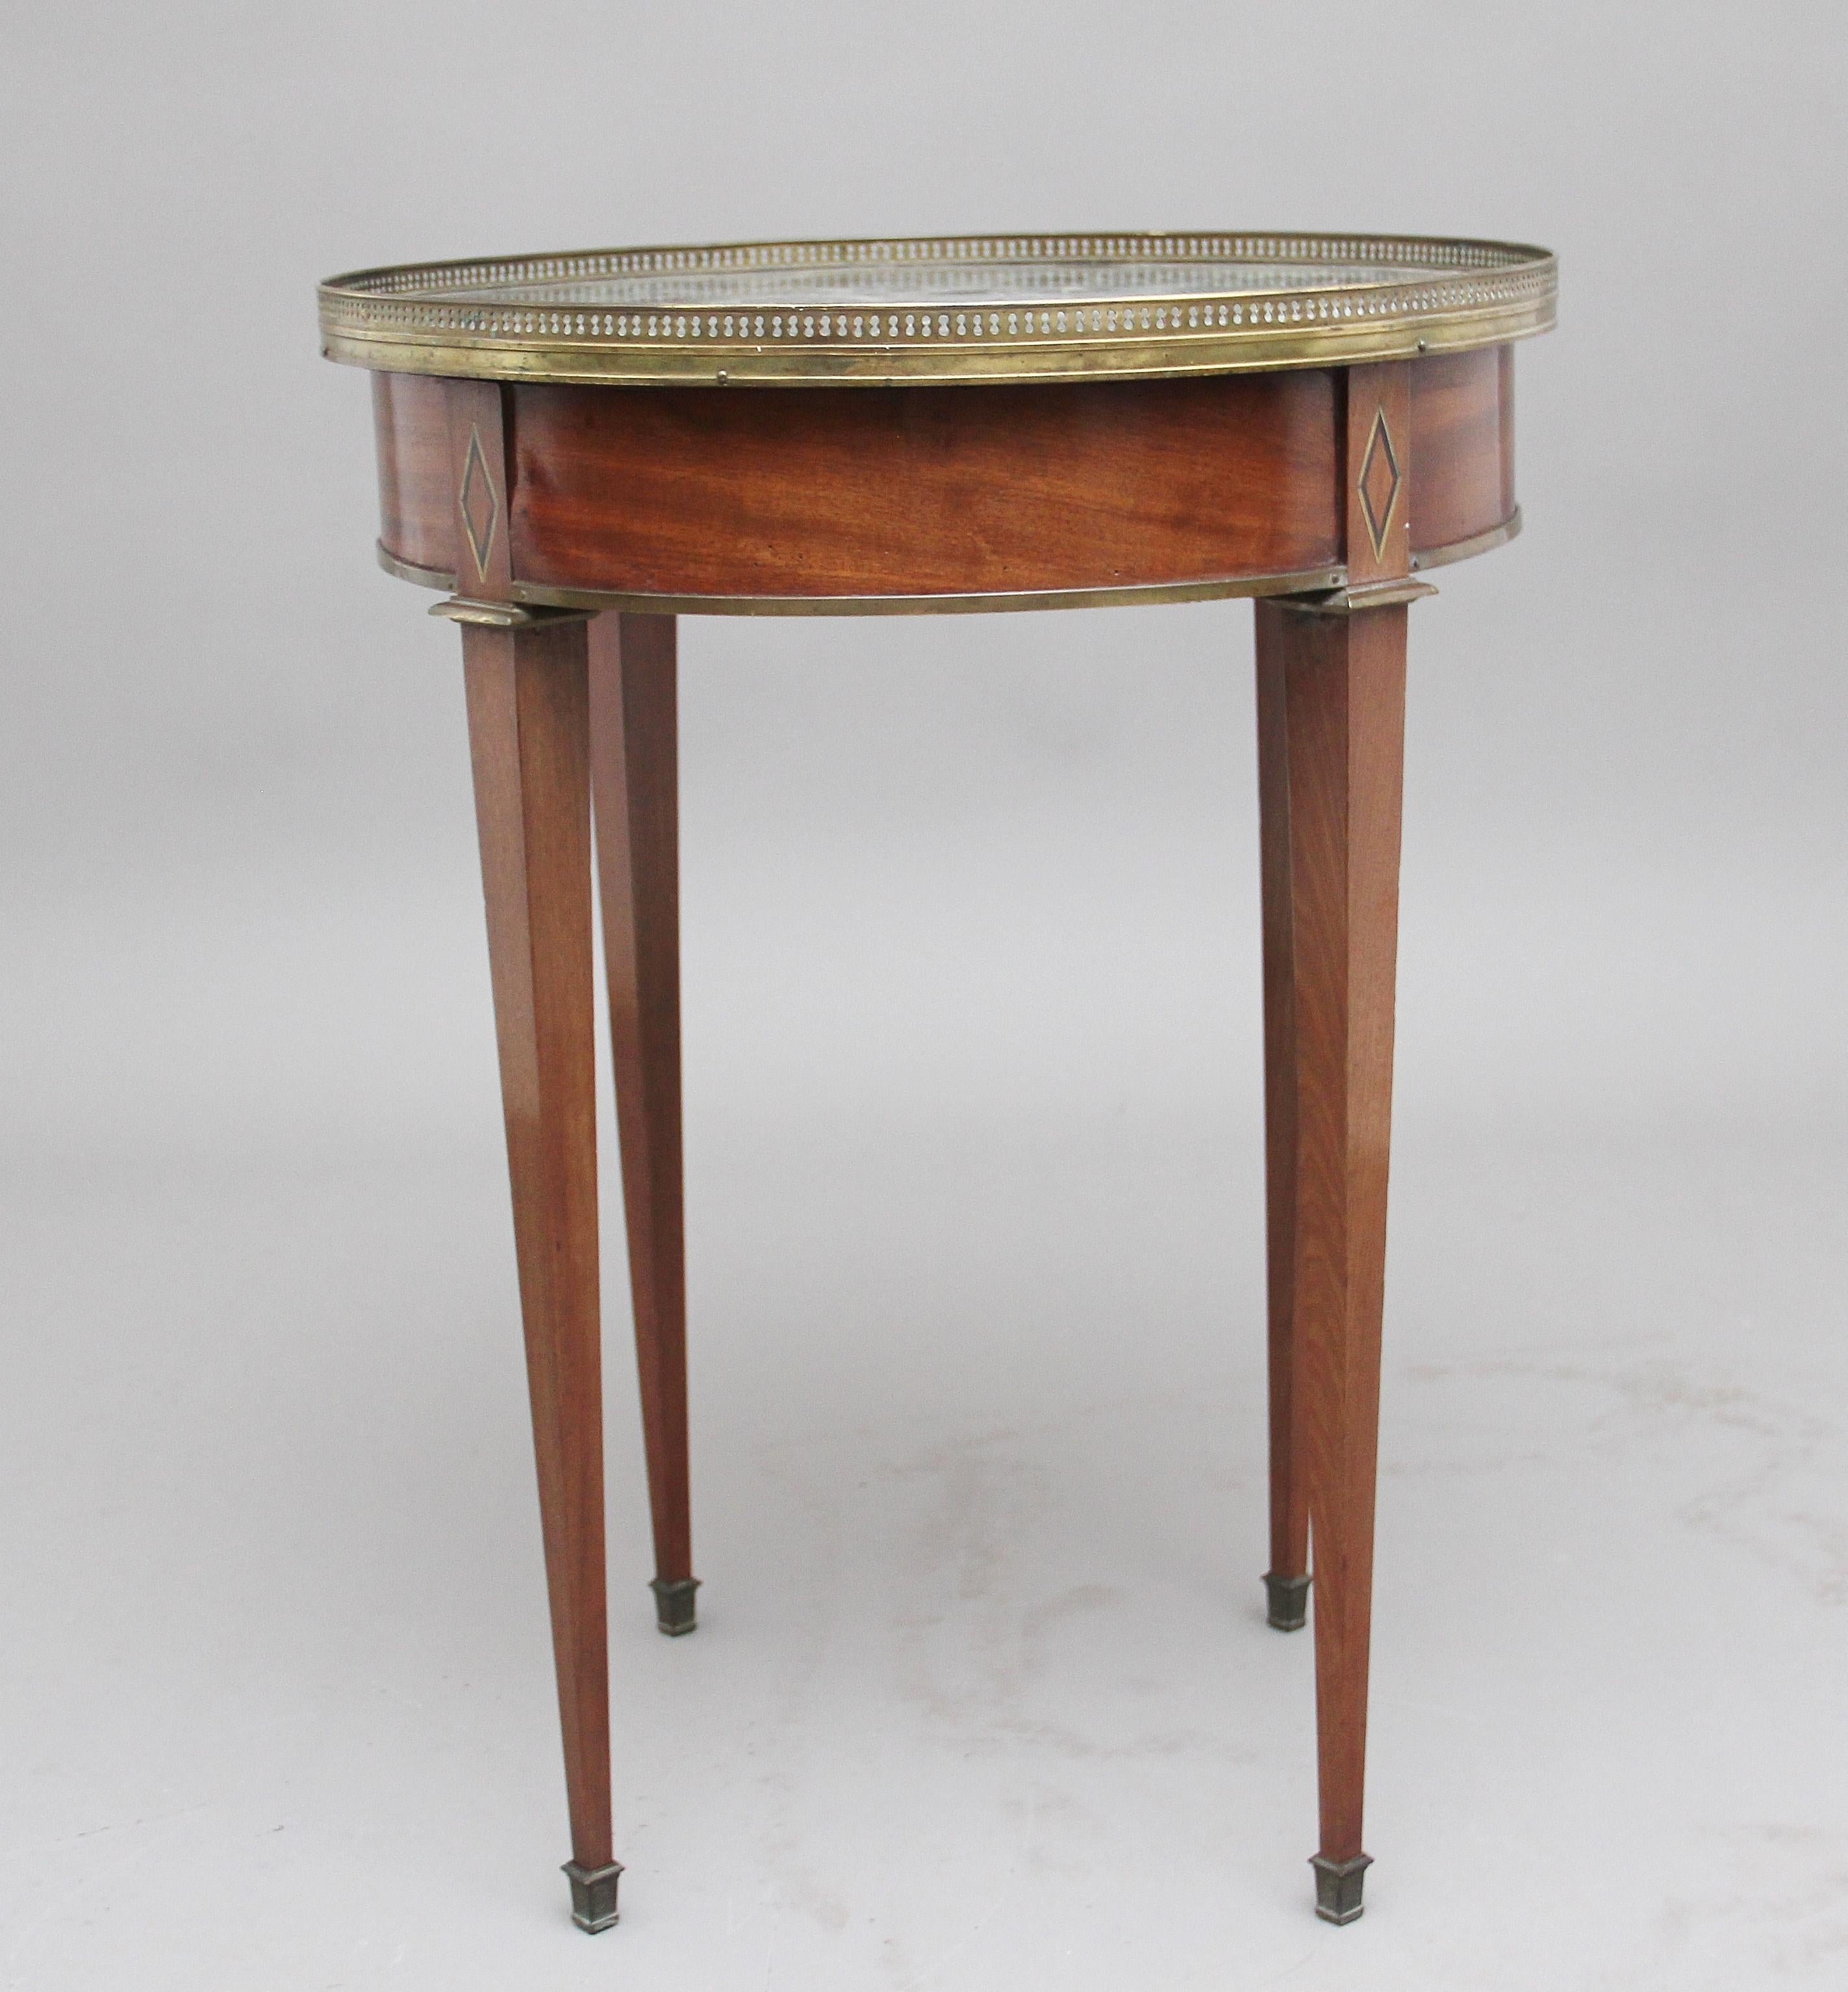 Late 19th Century 19th Century Mahogany and Marble-Top Occasional Table